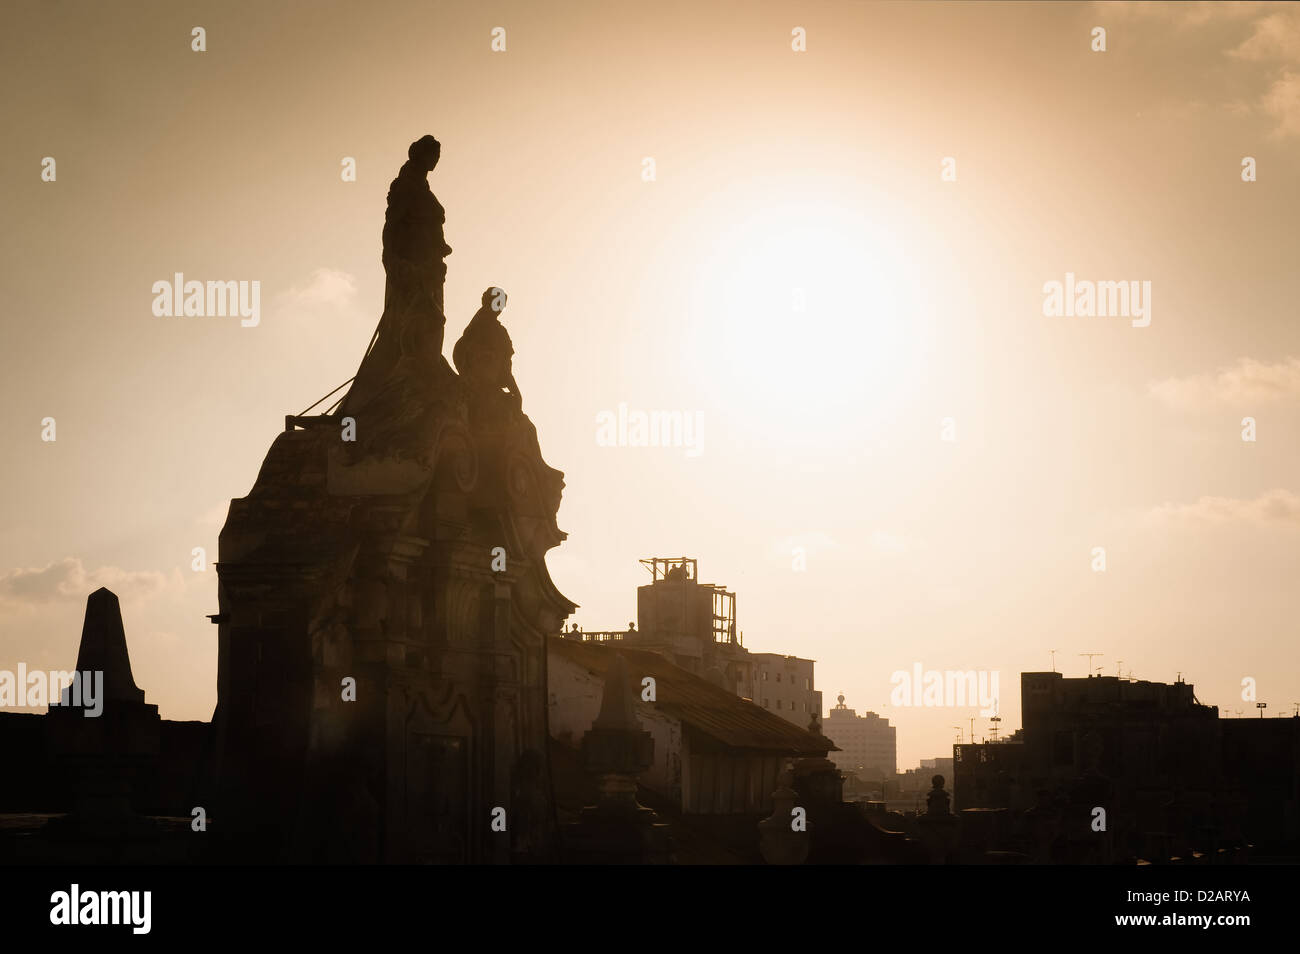 Silhouette of statues on ornate building Stock Photo